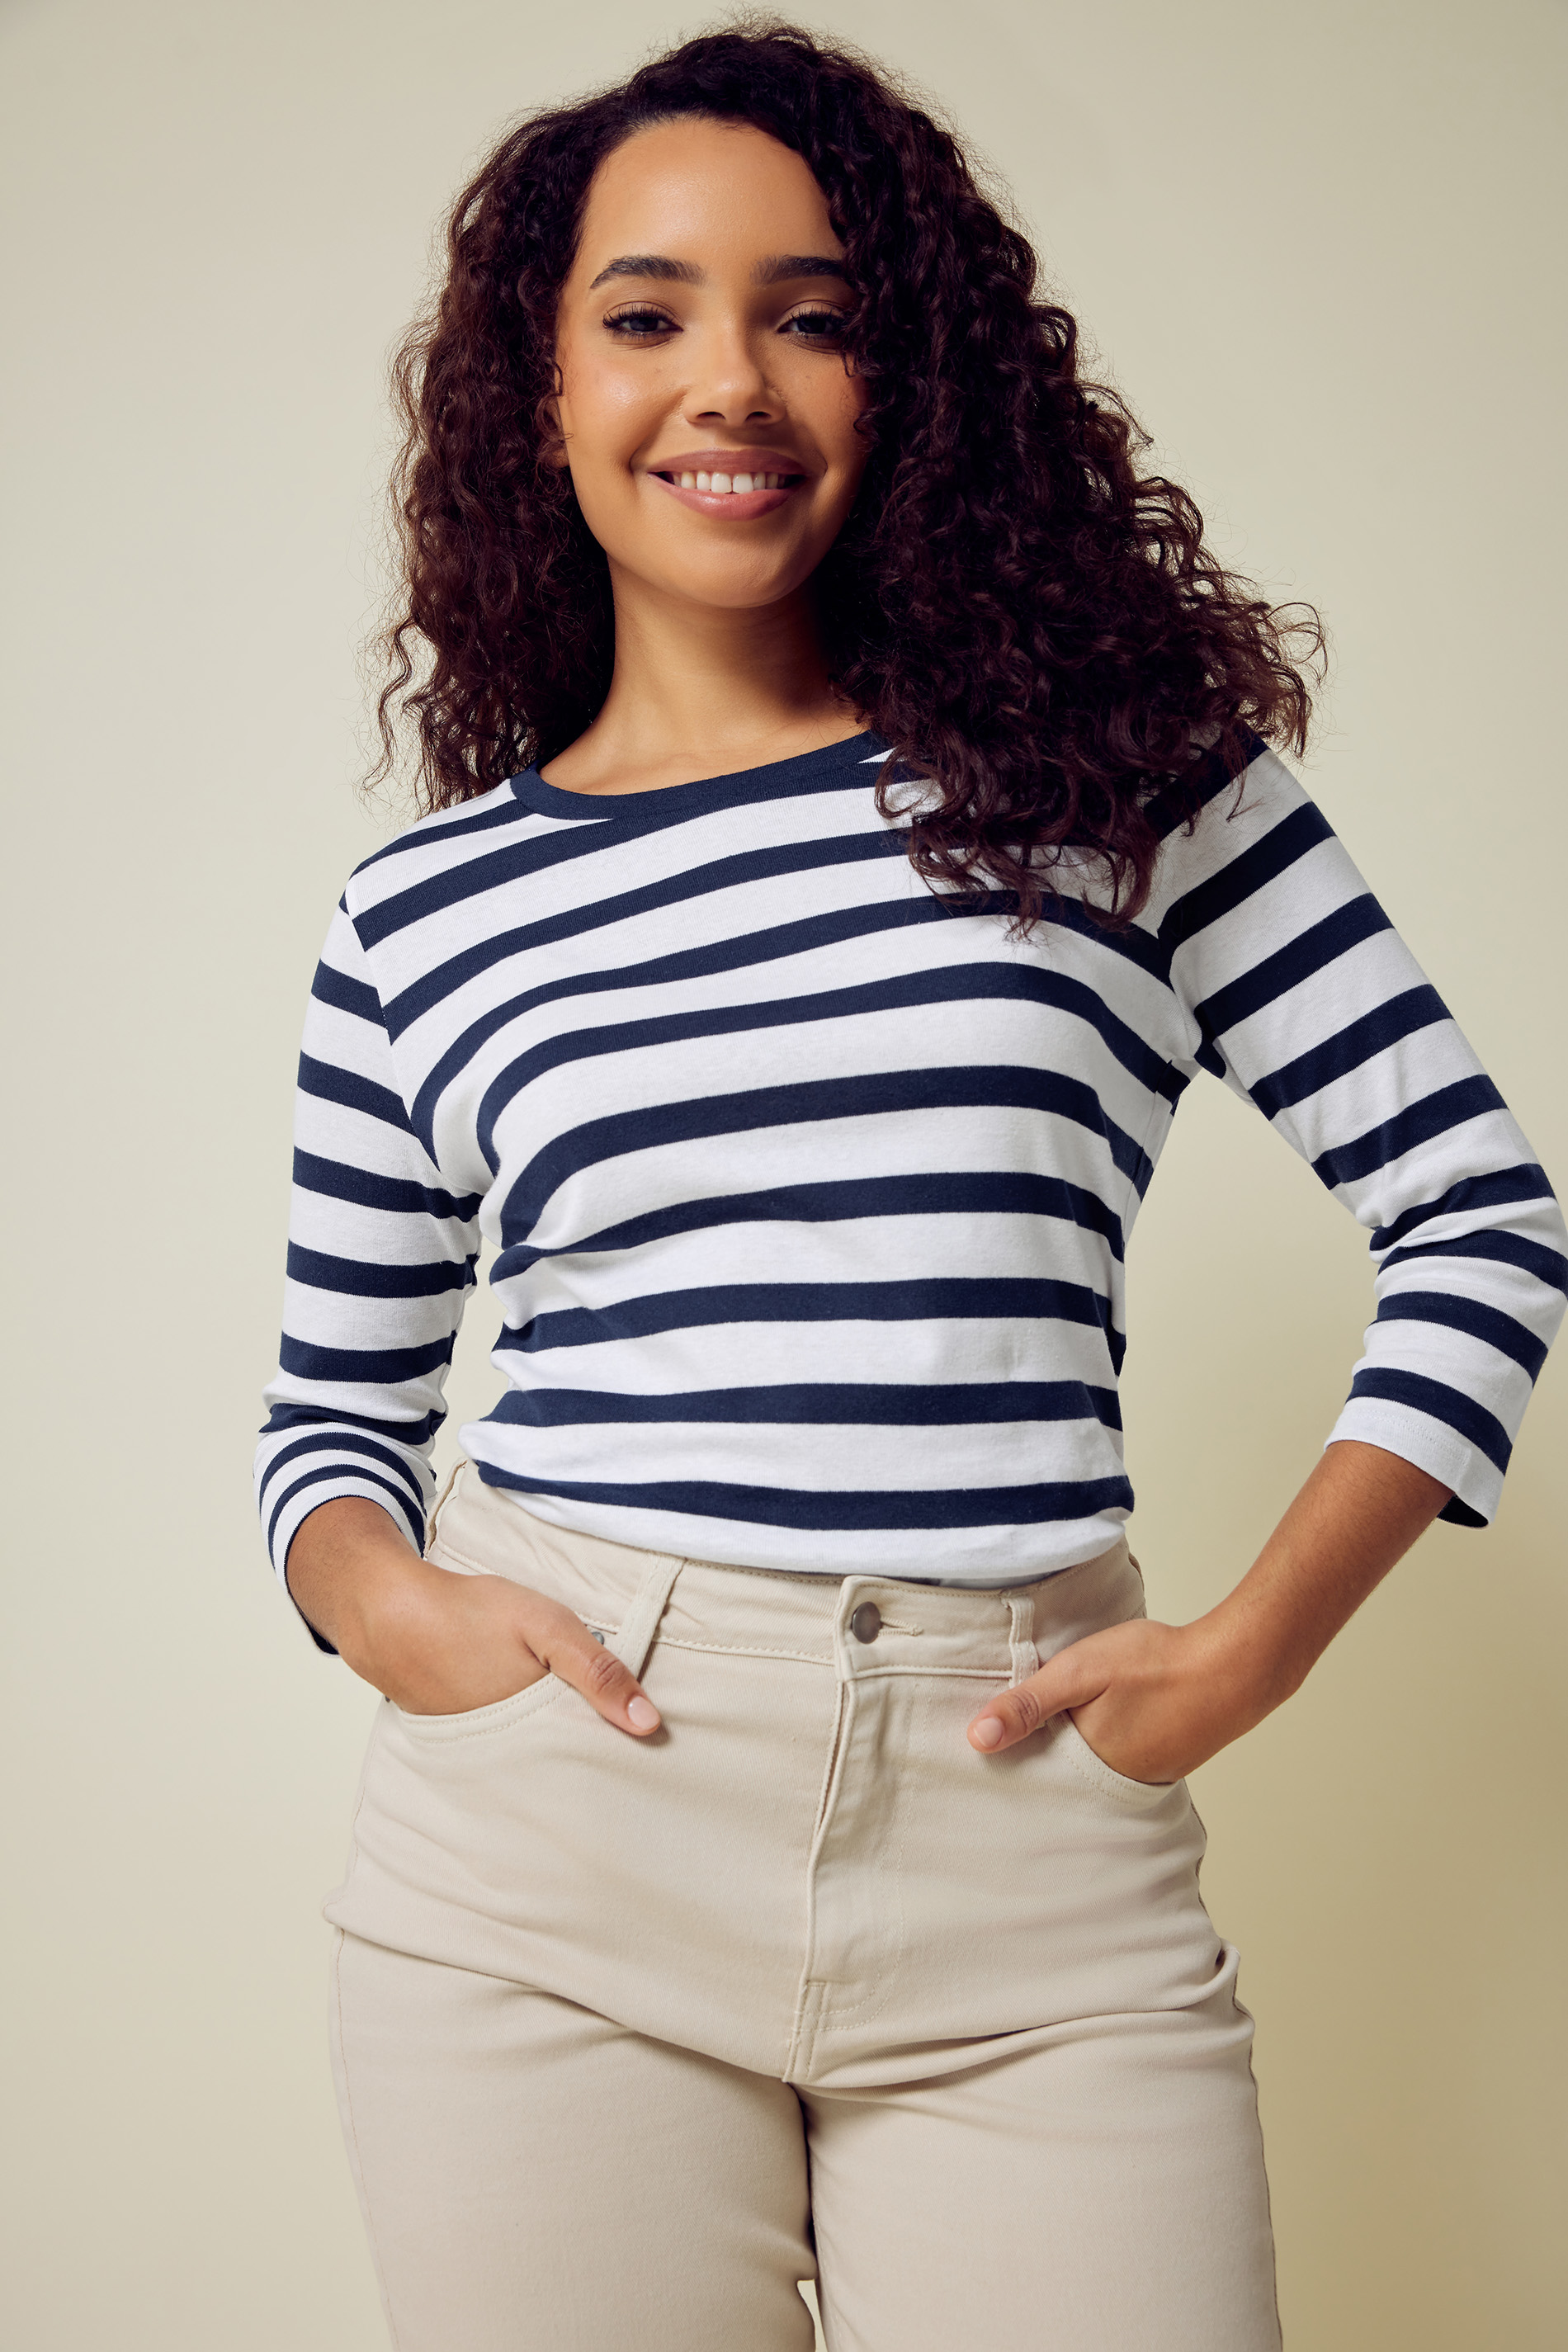 M&Co Navy Blue & Ivory Striped 3/4 Sleeve Cotton Top | M&Co 1